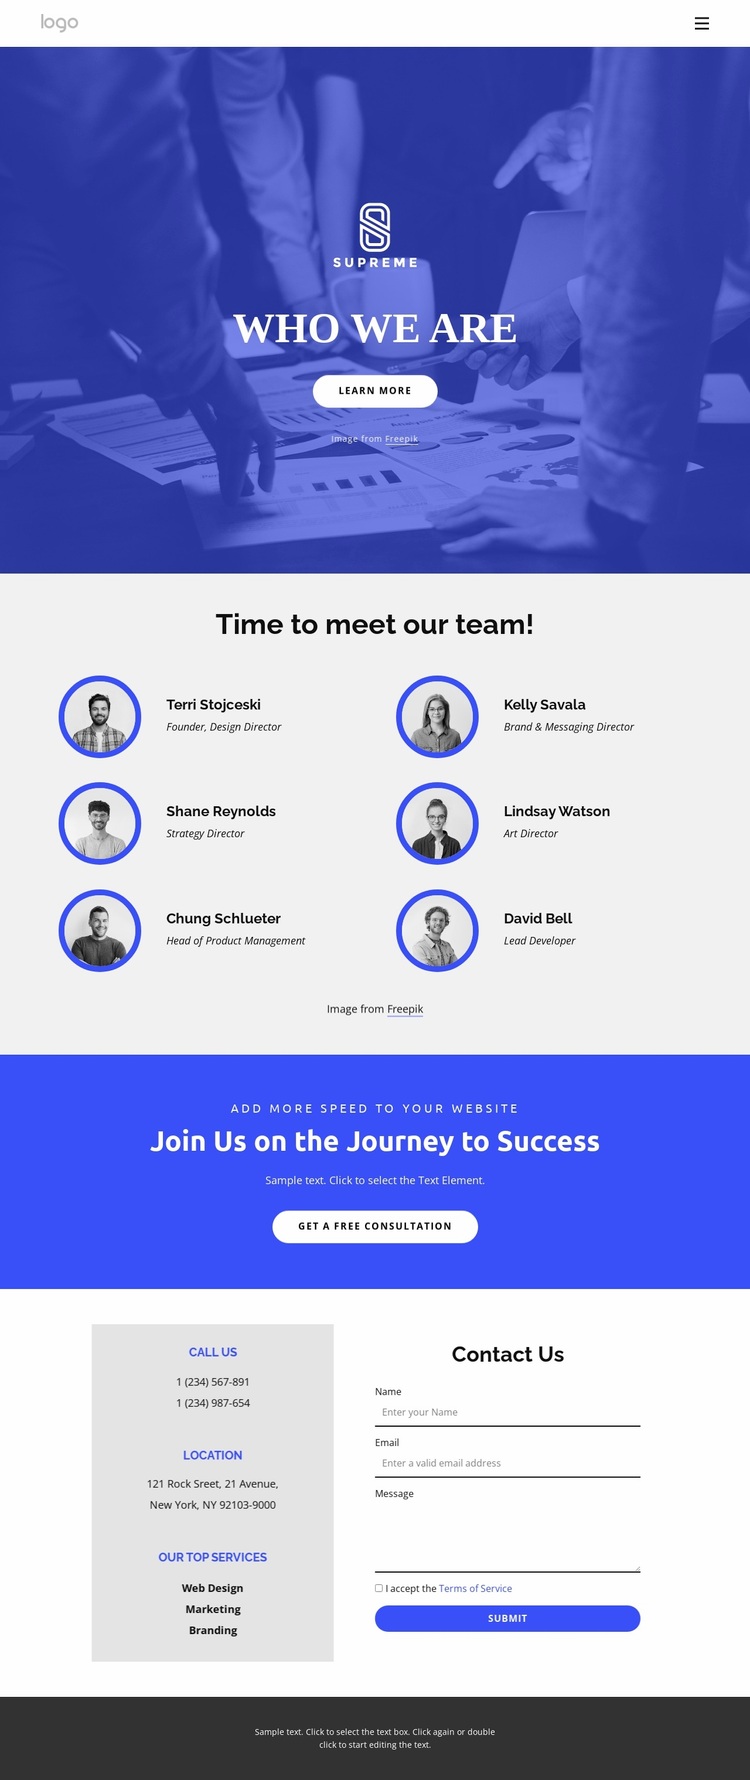 Time to meet our amazing team Website Design